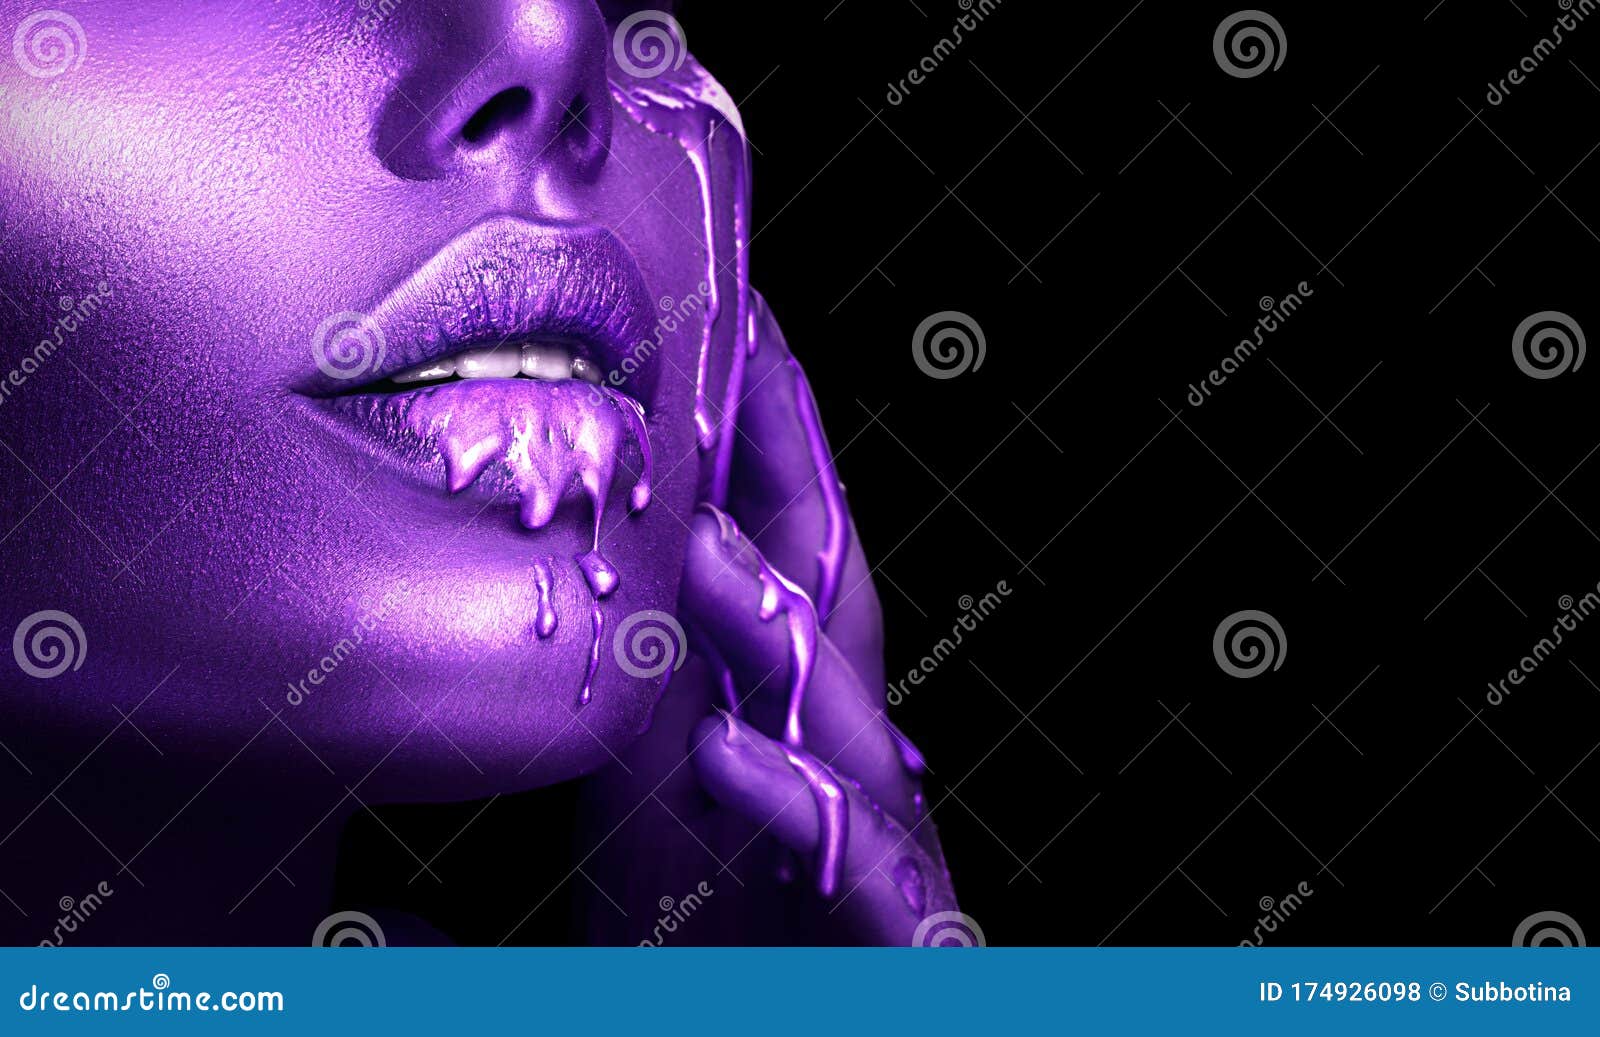 abstract violet makeup, lipstick dripping. purple paint drops on sexy lips. lipgloss drops, liquid drops on beautiful face